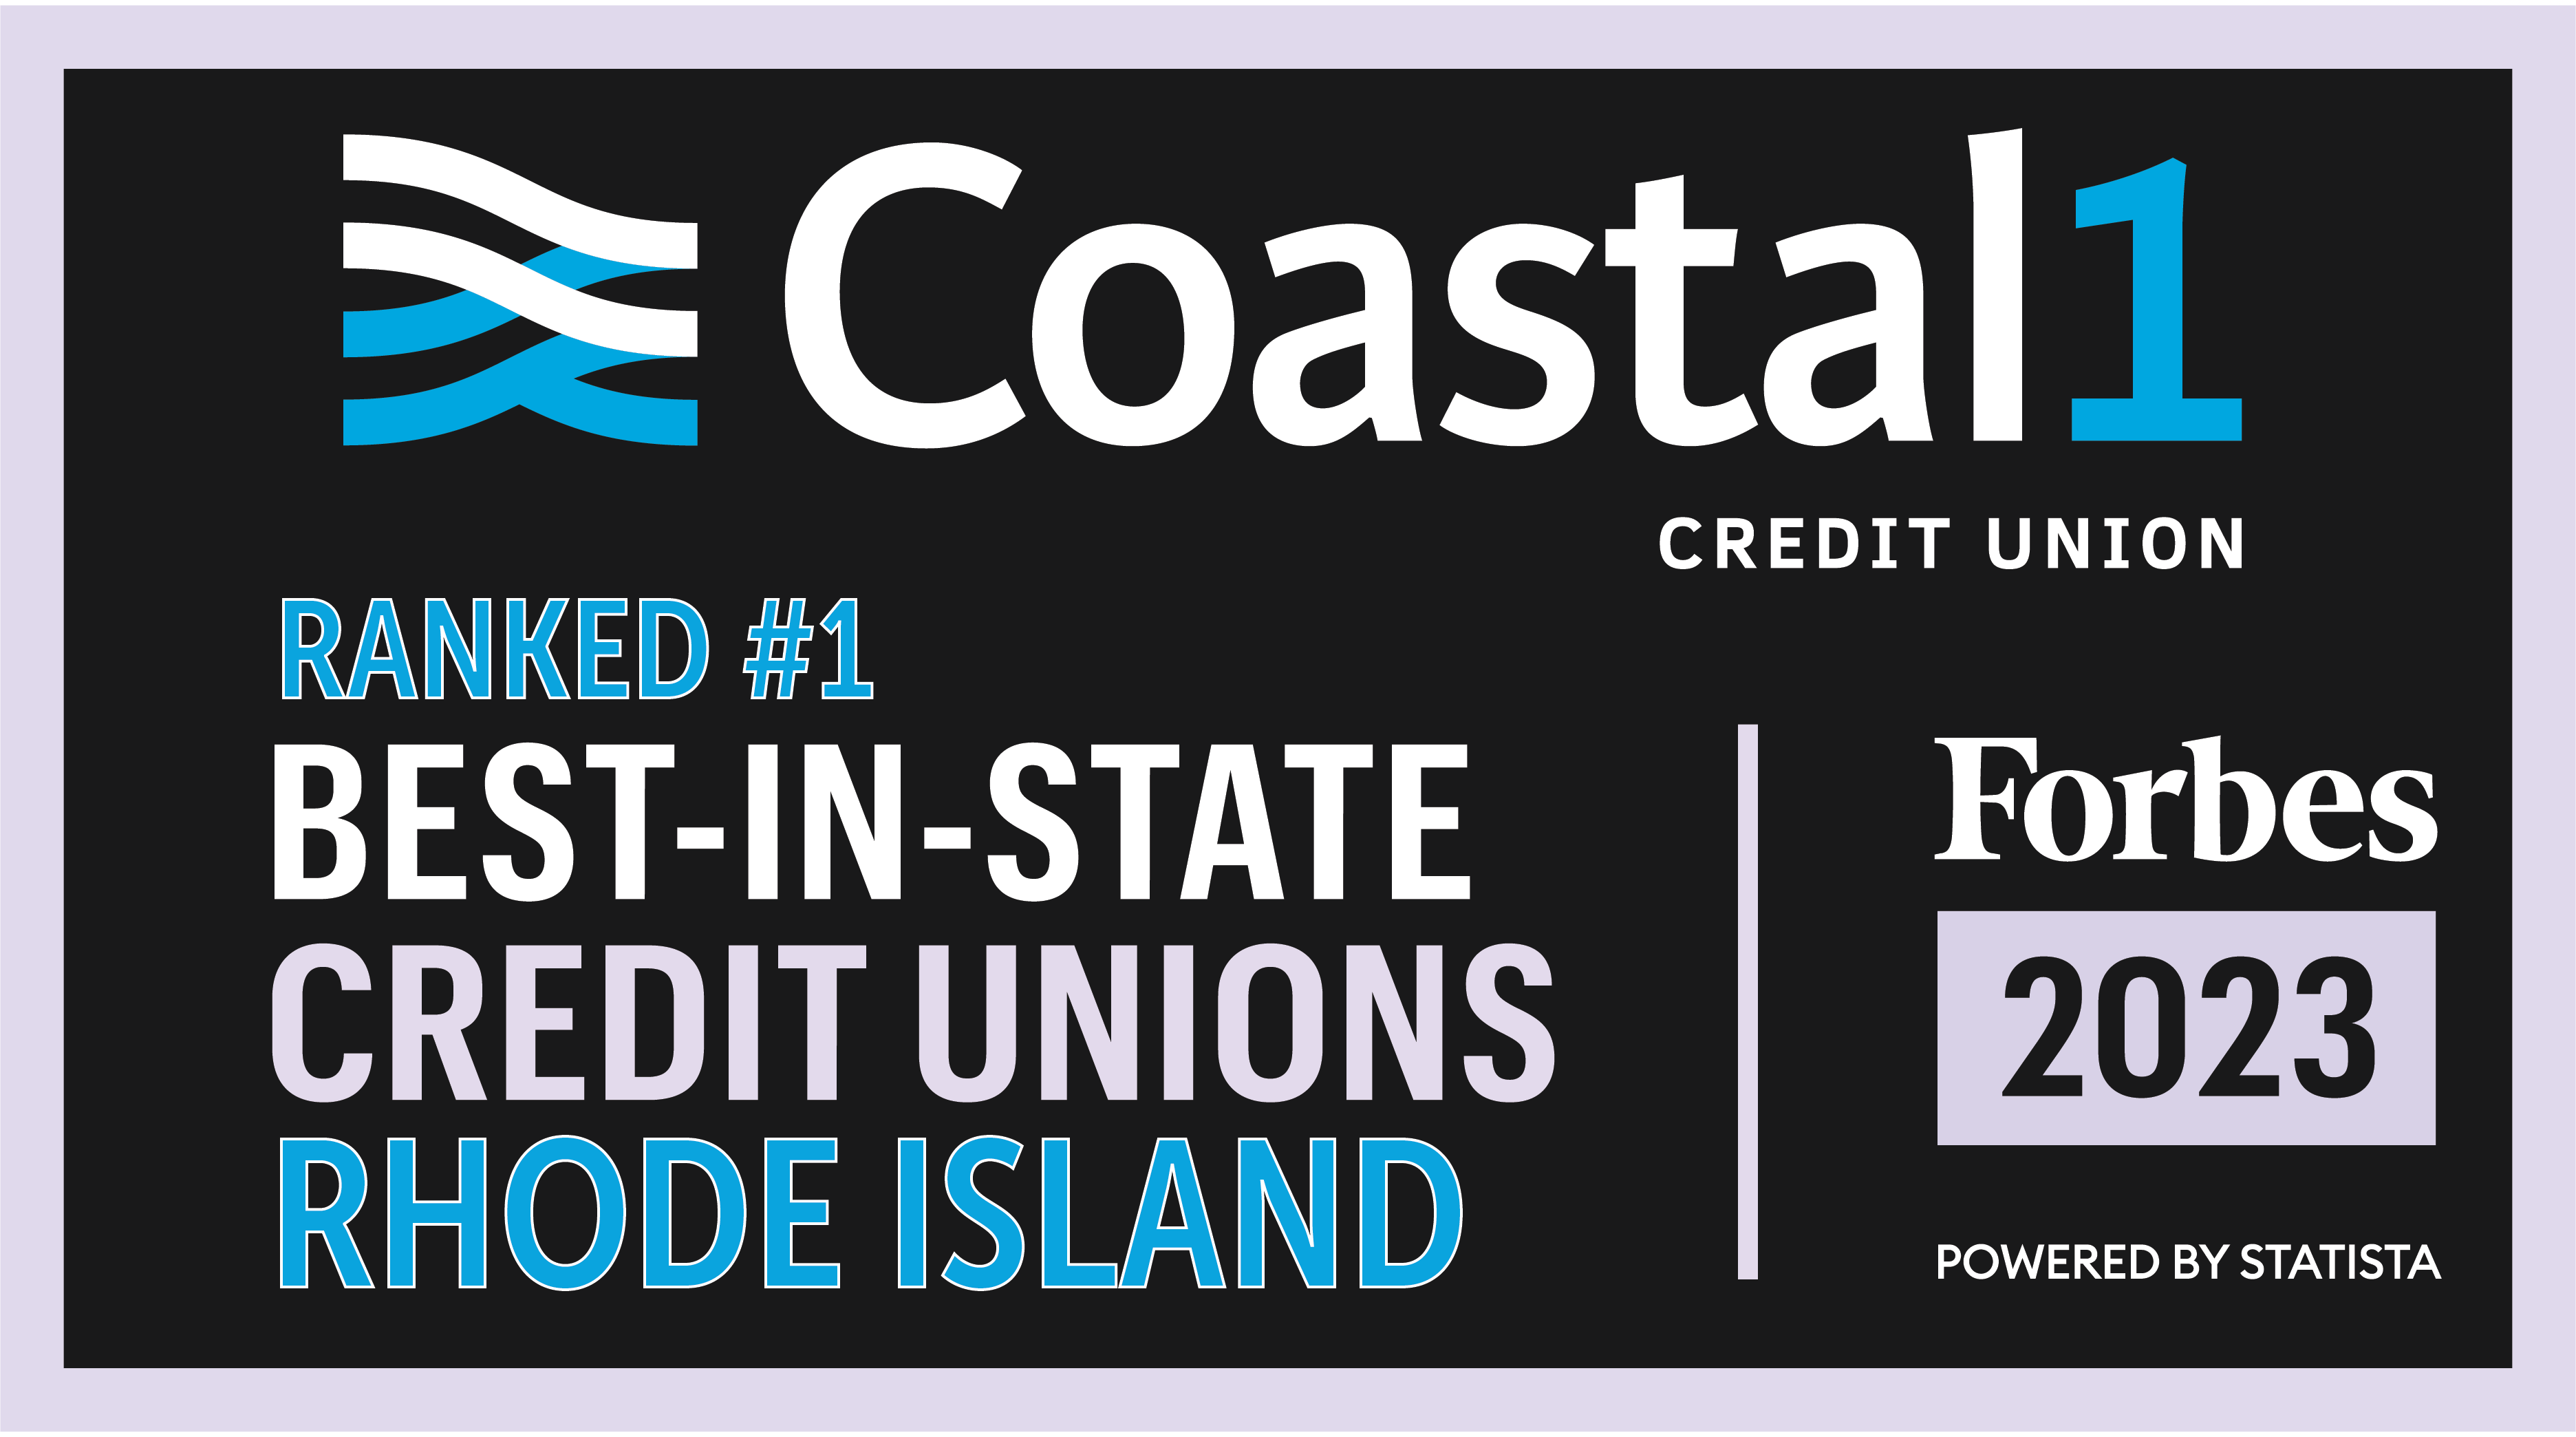 Coastal1 Credit Union Ranked #1 Best-in-State Rhode Island Forbes 2023 Powered by Statista